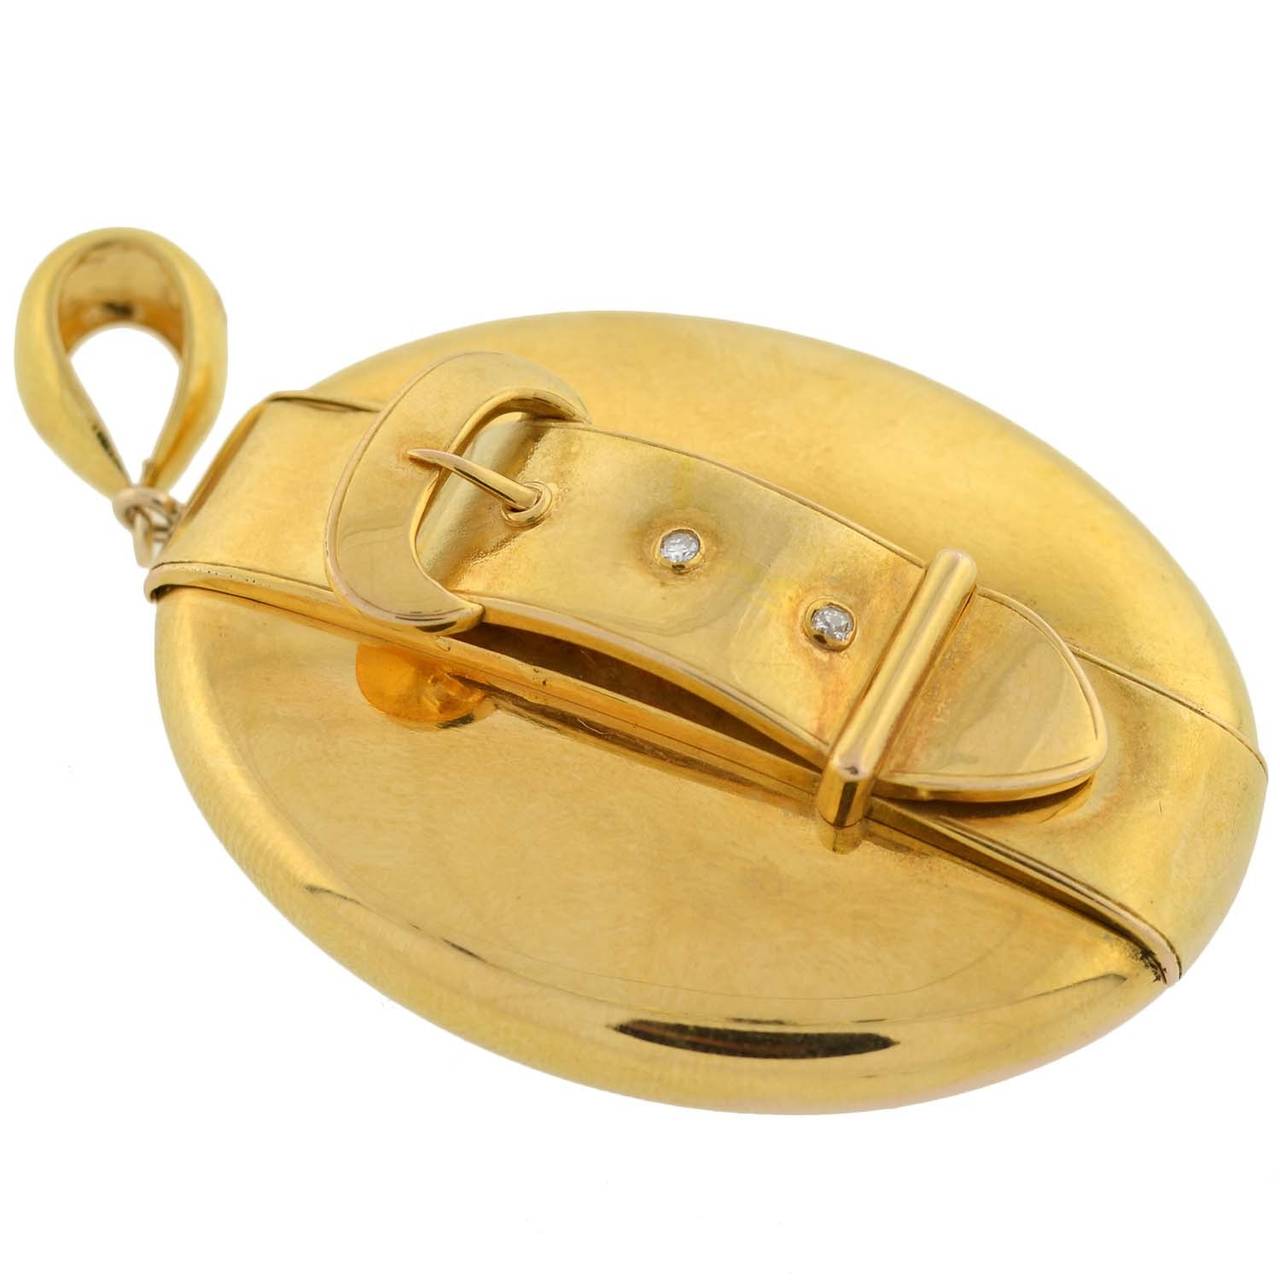 A delightful gold buckle locket from the Victorian (circa 1880) era! This beautiful oval-shaped piece is made of 14kt yellow gold and has a fabulous 3-dimensional buckle that lies vertically, from the top to the bottom. The buckle has 2 small old